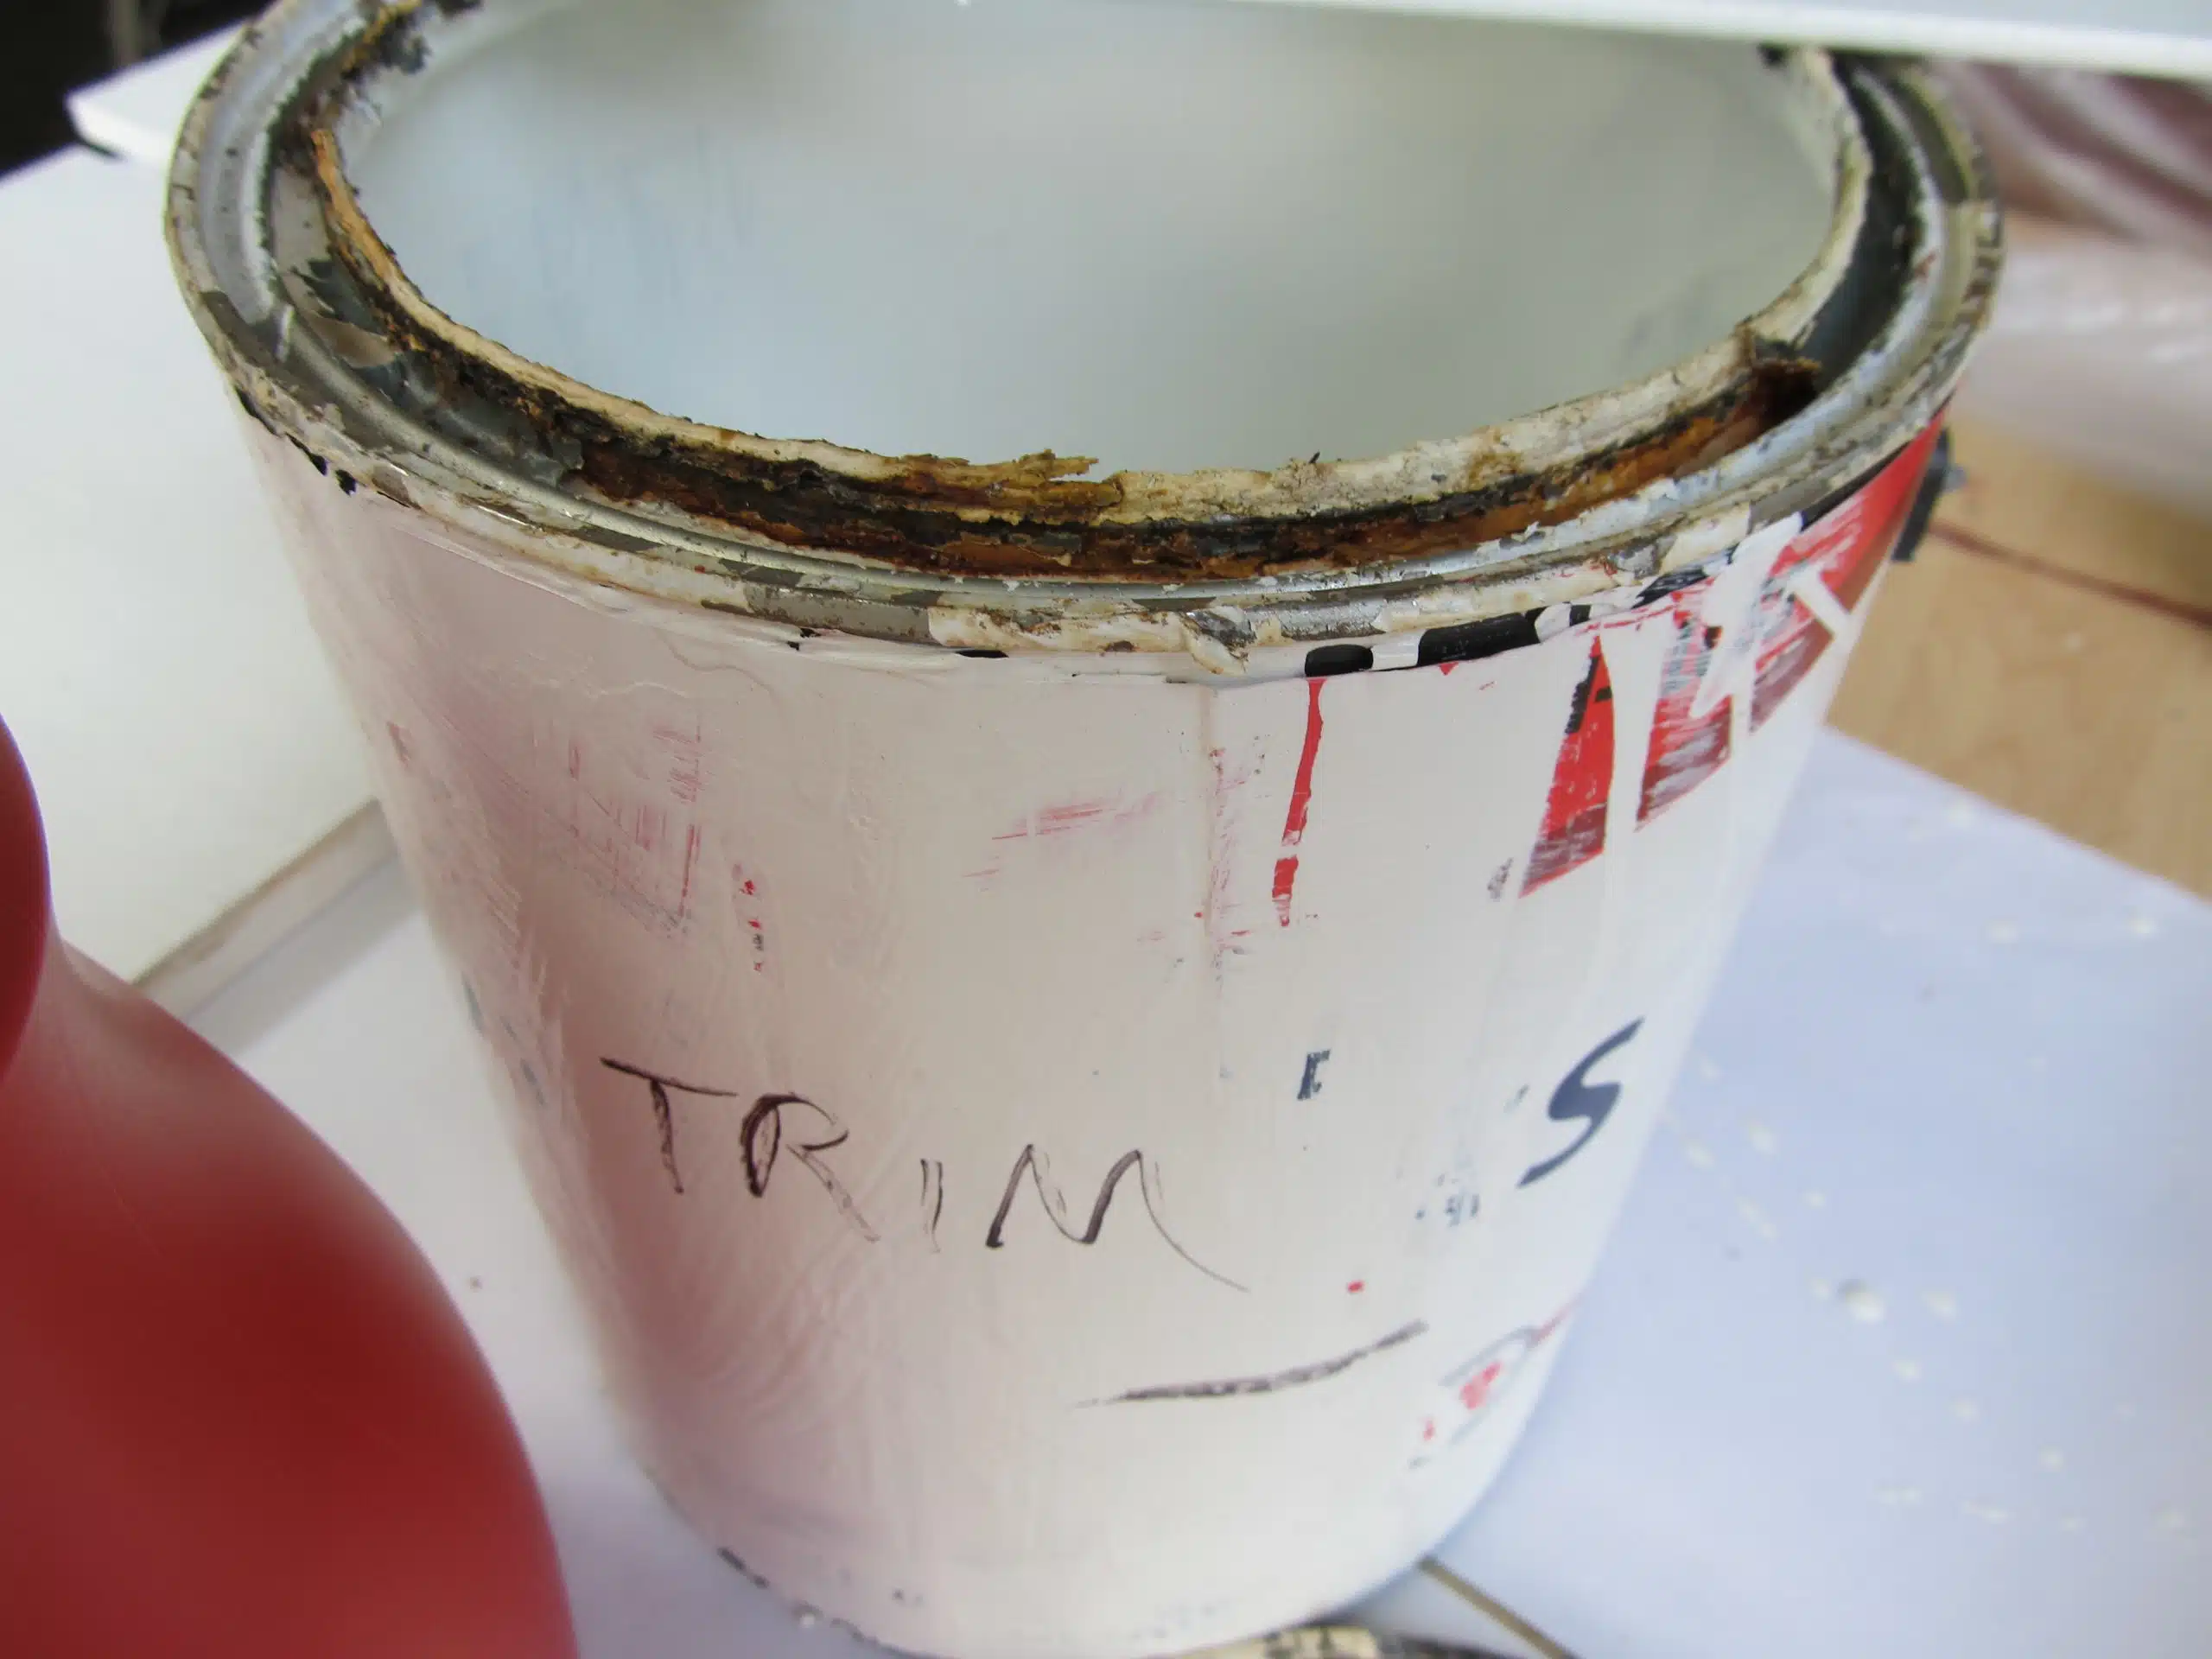 Touch Up Cup - Don't let your paint get old or go to waste ever again.  Storing paint just got easier with Touch Up Cup! Save your paint for DIY's,  touch ups